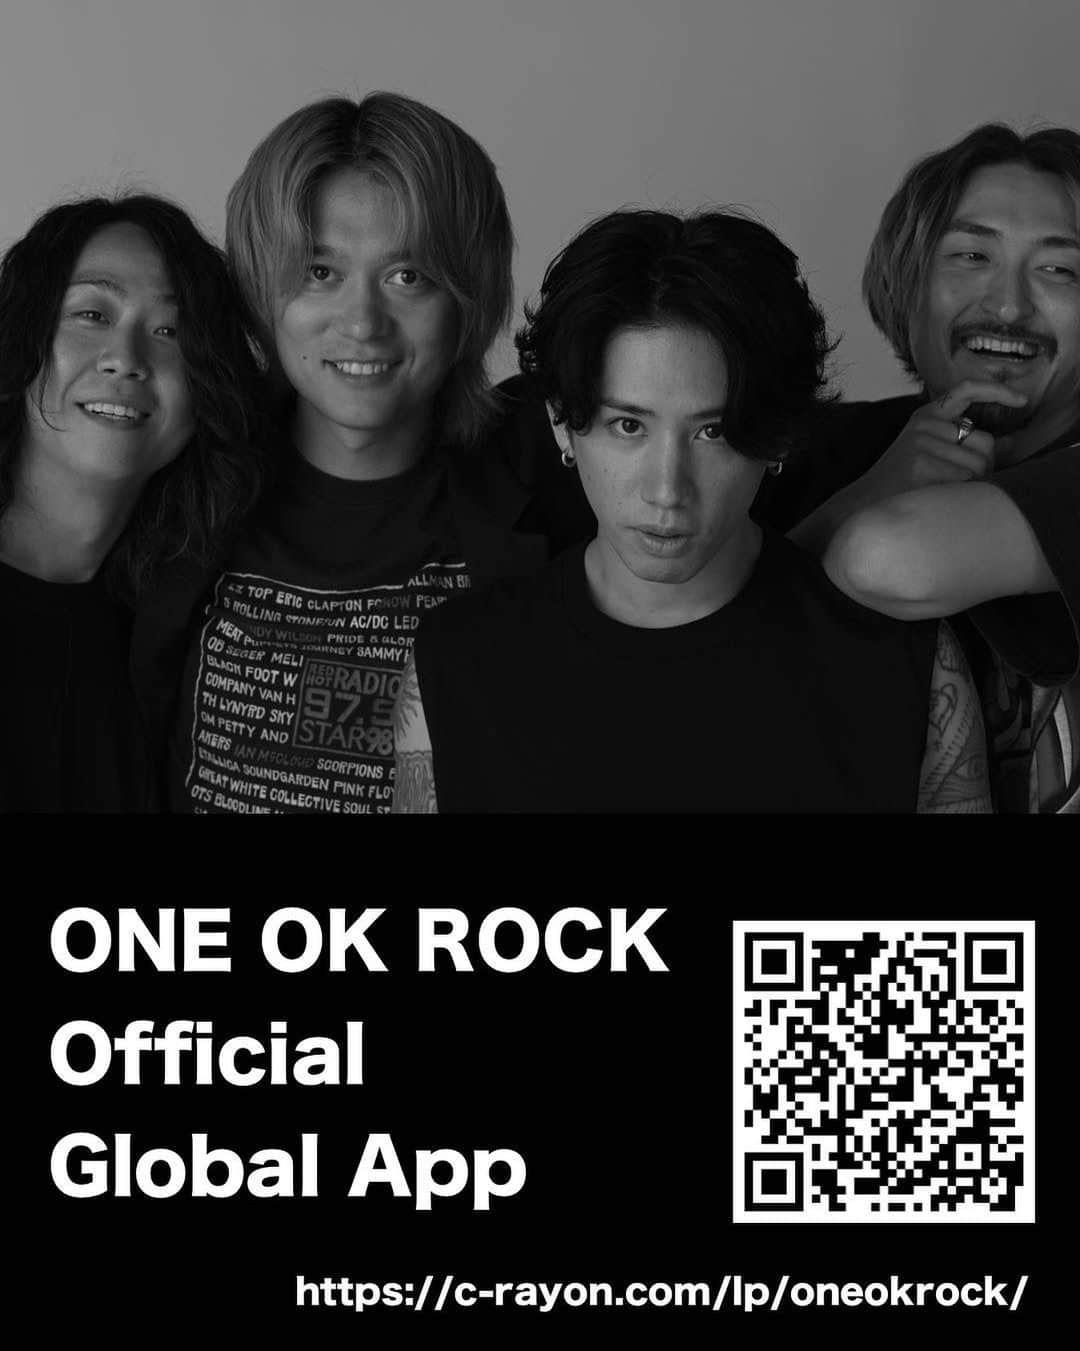 Tomoyaのインスタグラム：「ONE OK ROCK has launched it's global mobile app! This app allows you to find all the latest news of the band so get it now! https://c-rayon.com/lp/oneokrock/  グローバルアプリができたよ🌏 チェックしてみてね🔥  #ONEOKROCK」